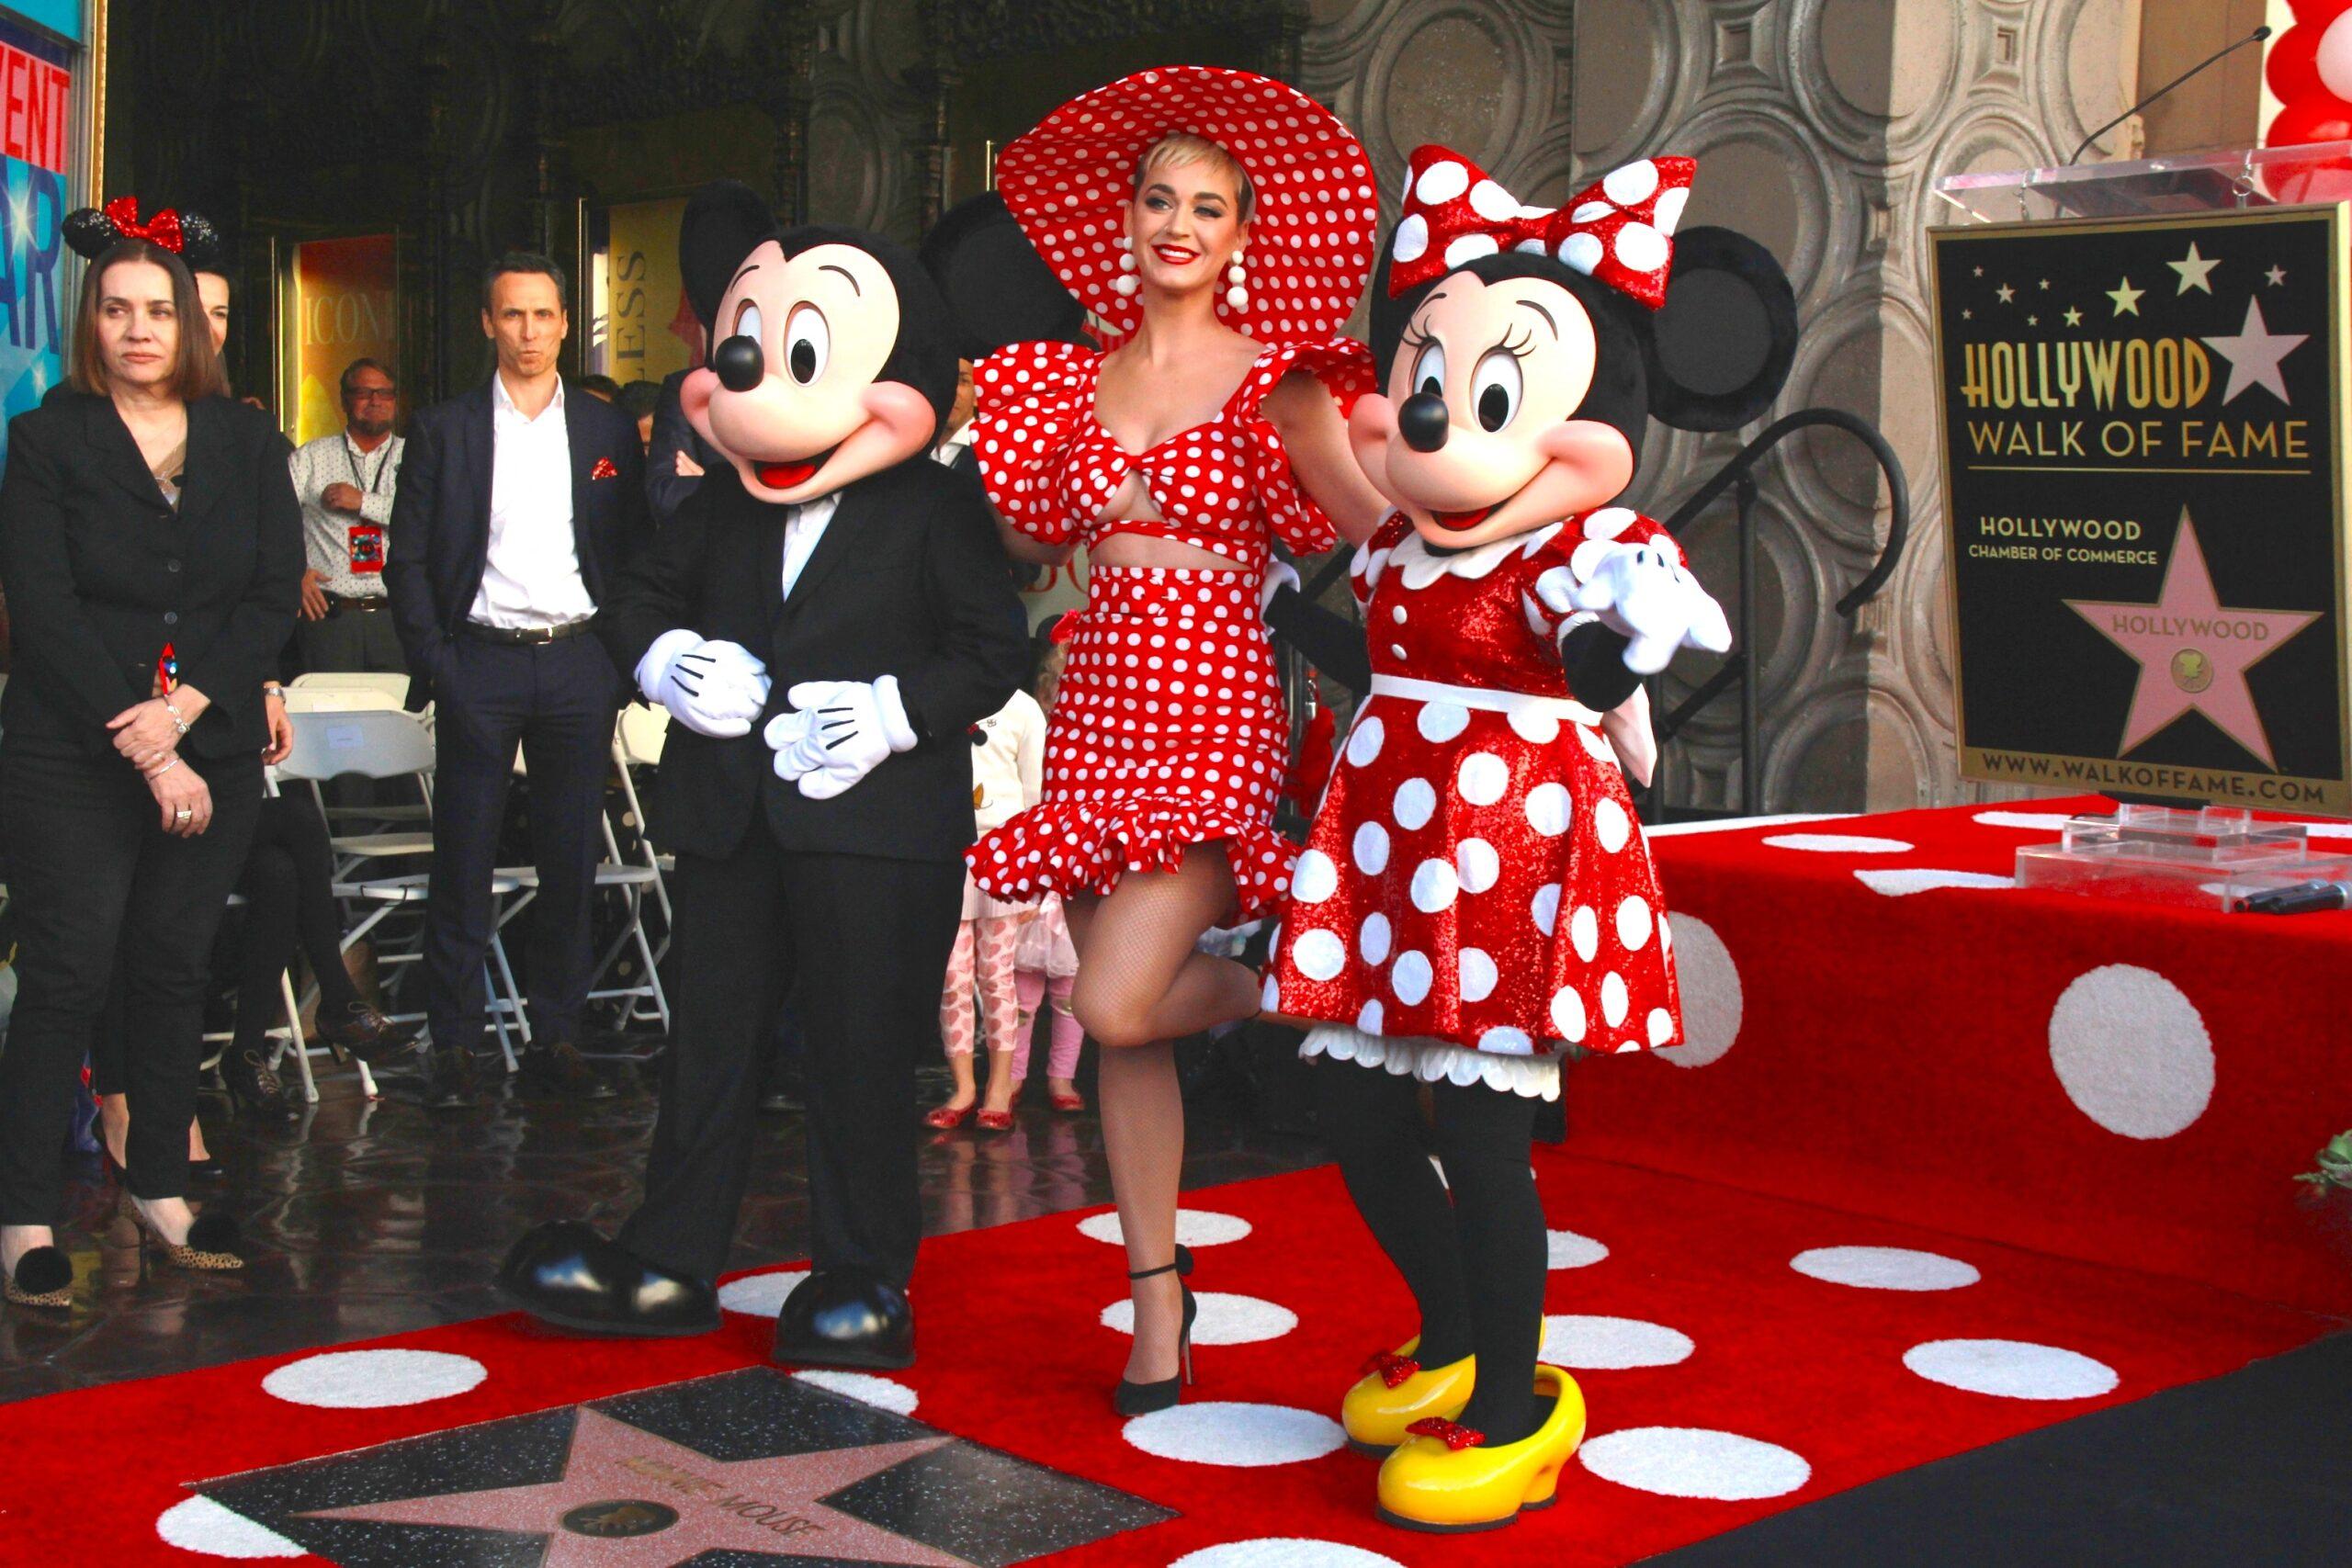 Katy Perry poses with Mickey Mouse and Minnie Mouse